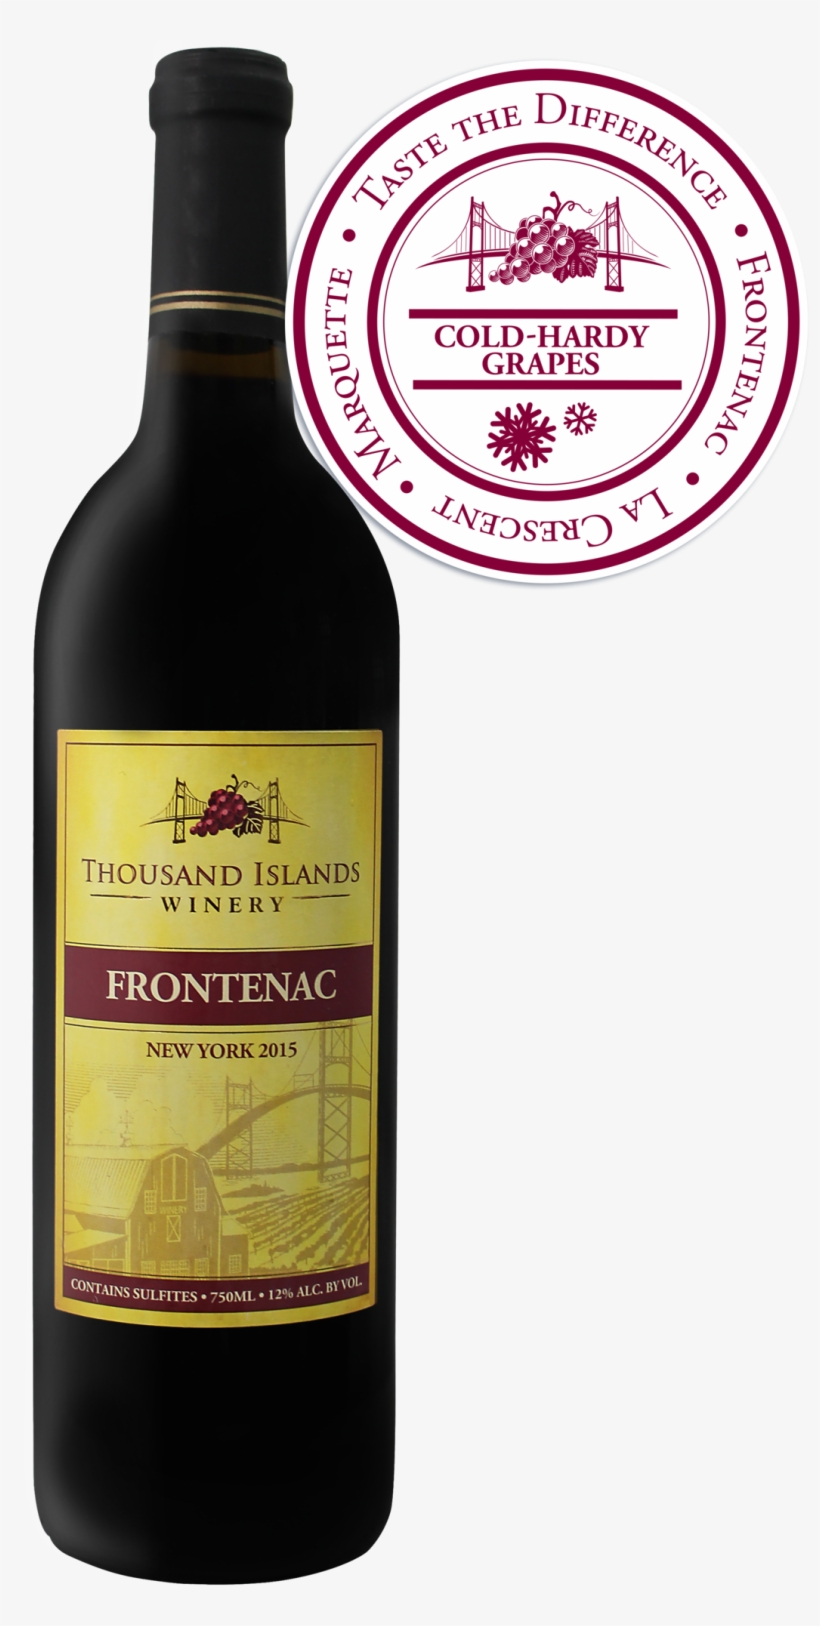 Photo Of 750 Ml Frontenac Bottle With Cold-hardy Grape - Thousand Islands Winery Frontenac, transparent png #2935729